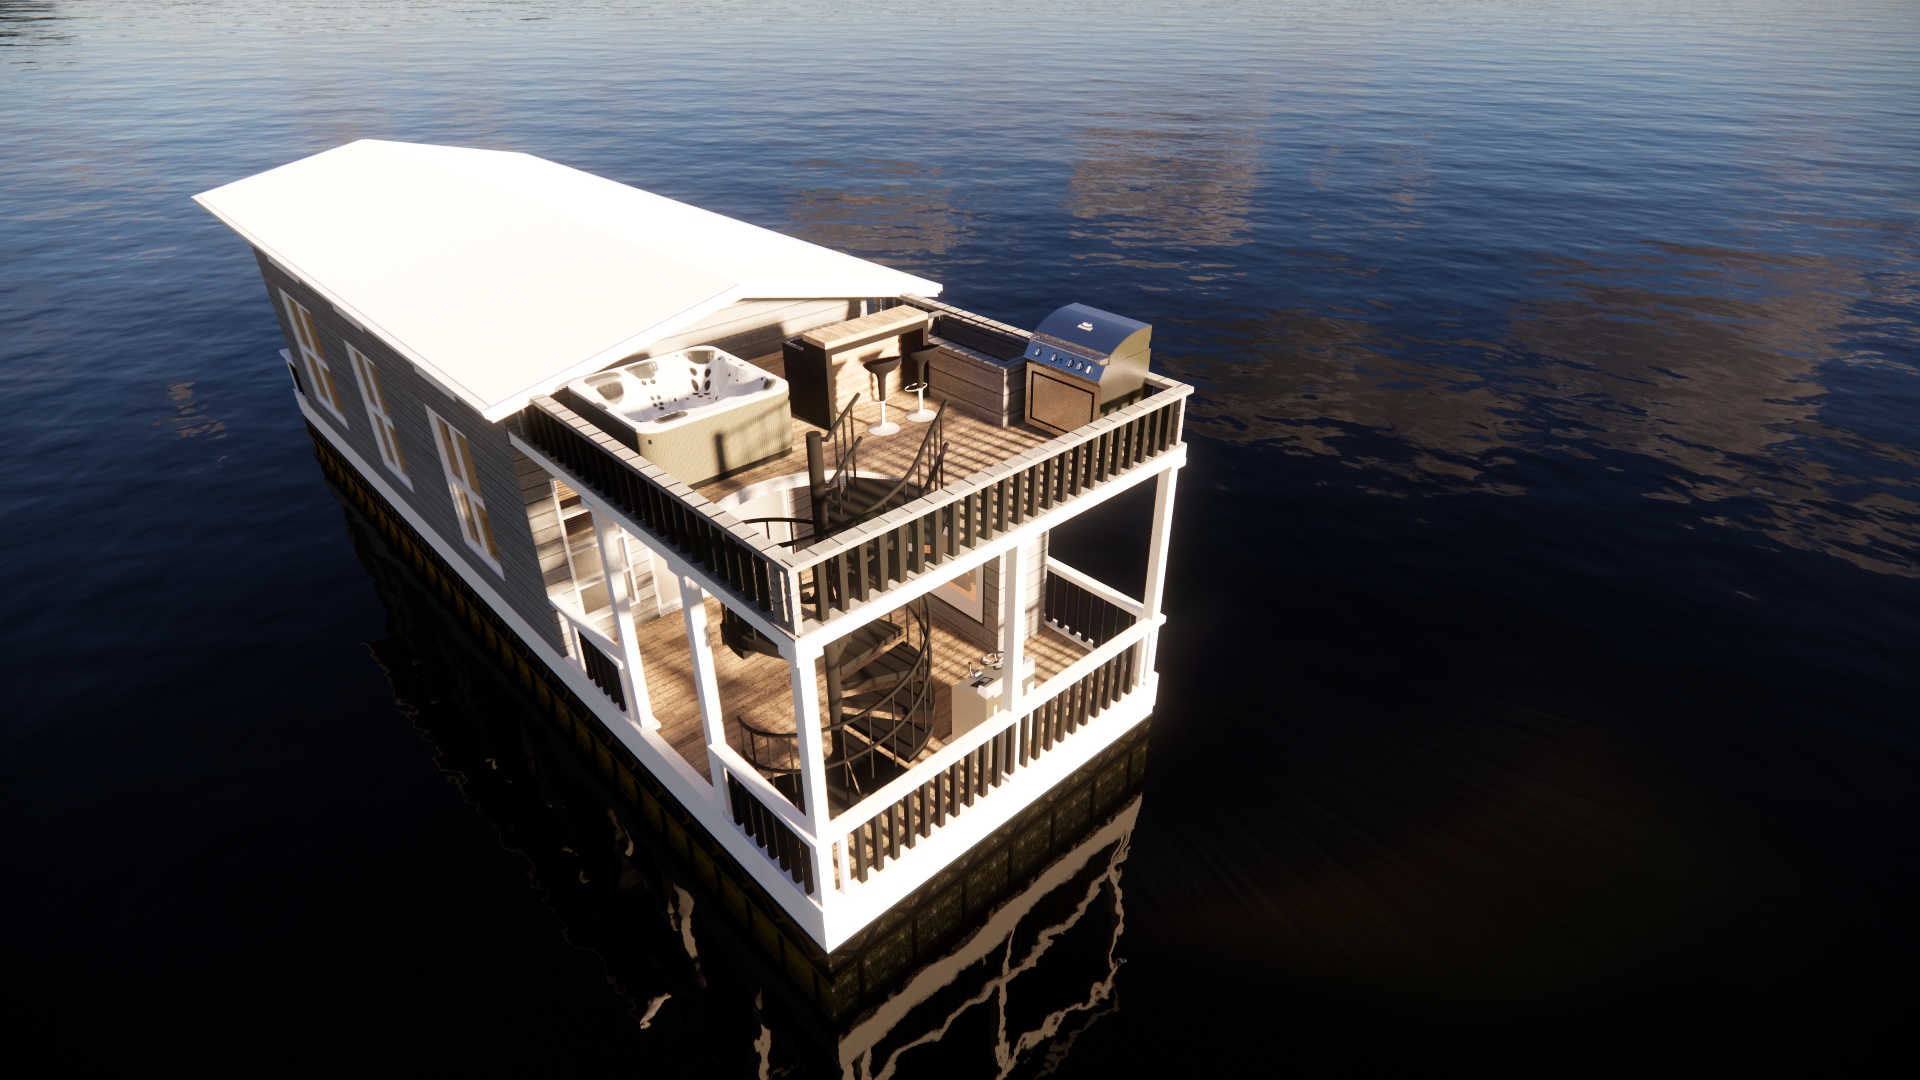 The American Houseboat-Zion Model